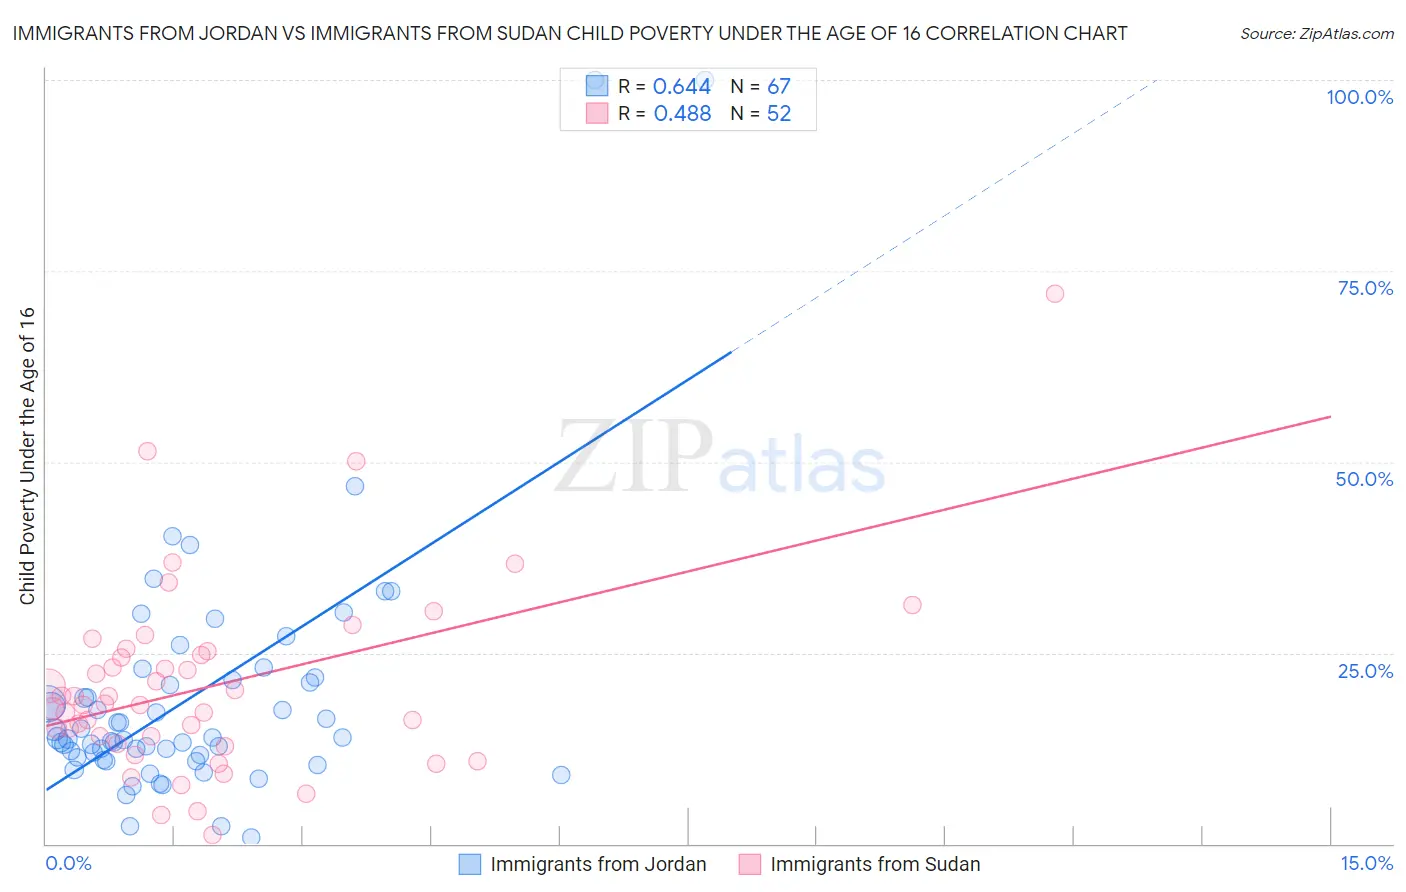 Immigrants from Jordan vs Immigrants from Sudan Child Poverty Under the Age of 16